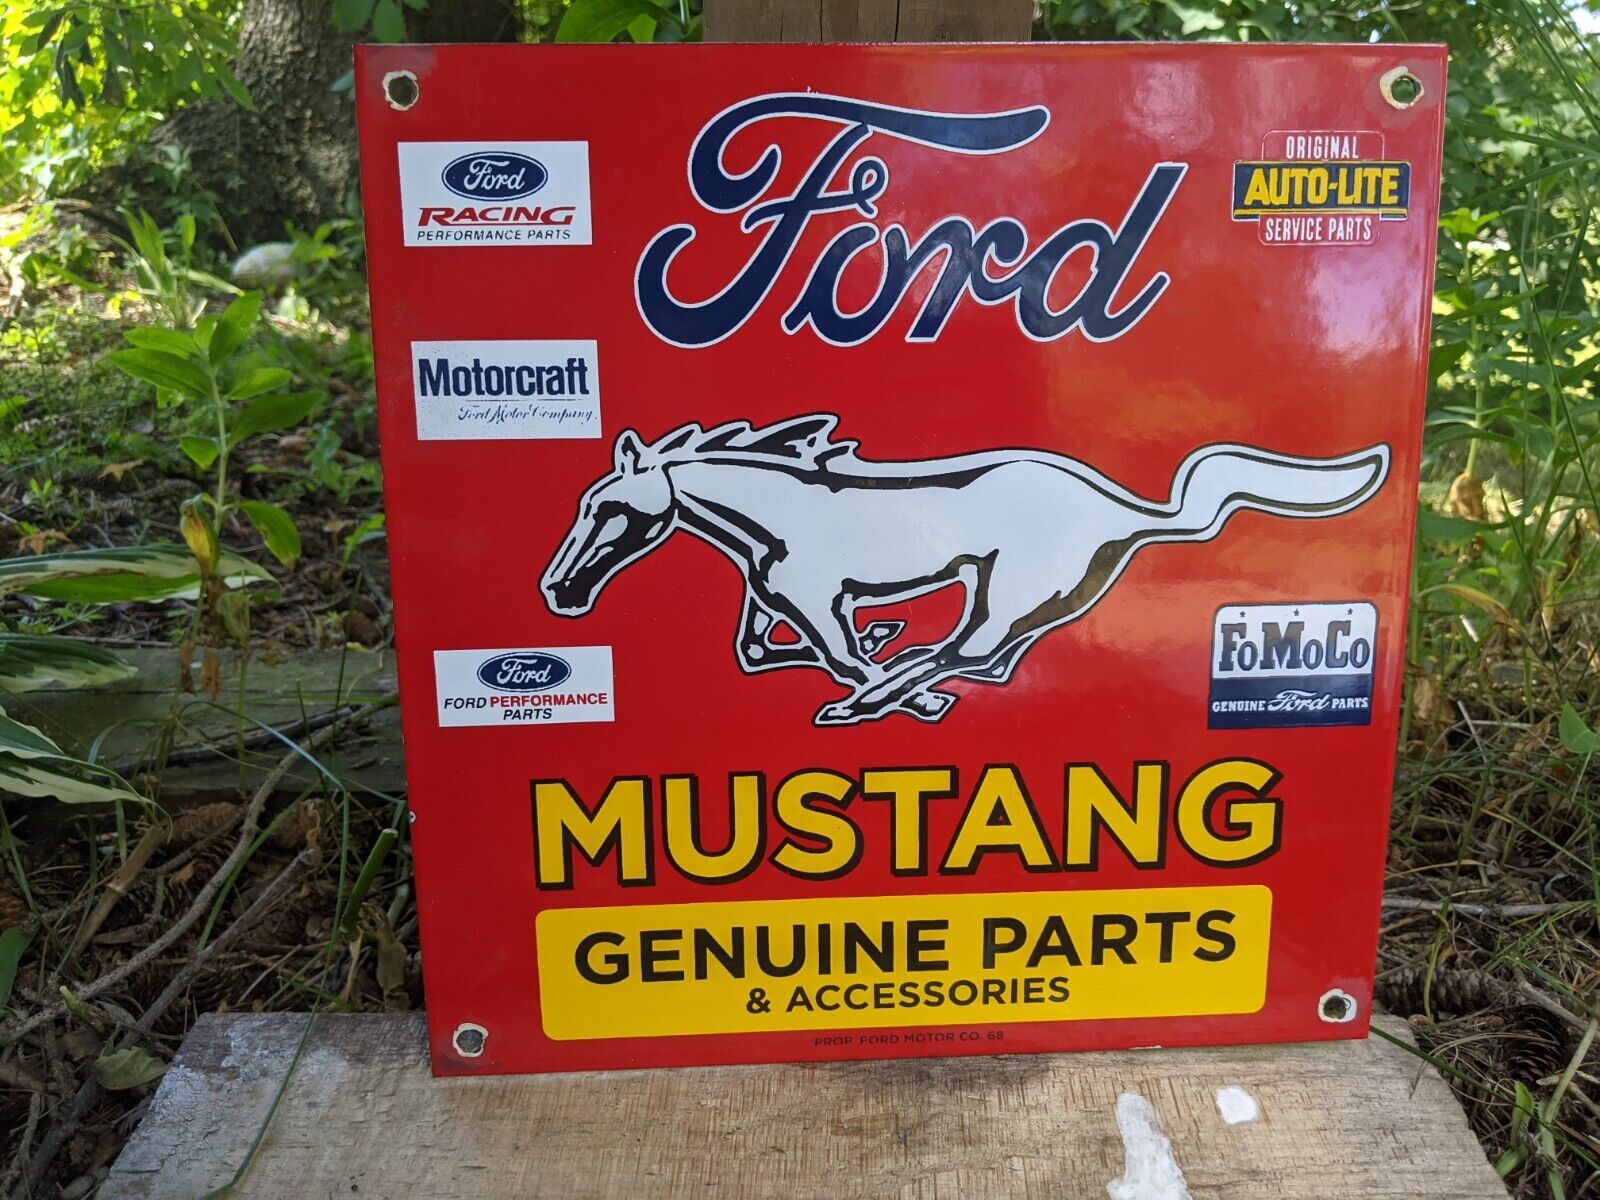 OLD VINTAGE DATED 1968 MUSTANG FORD MOTOR COMPANY PARTS PORCELAIN SIGN 12